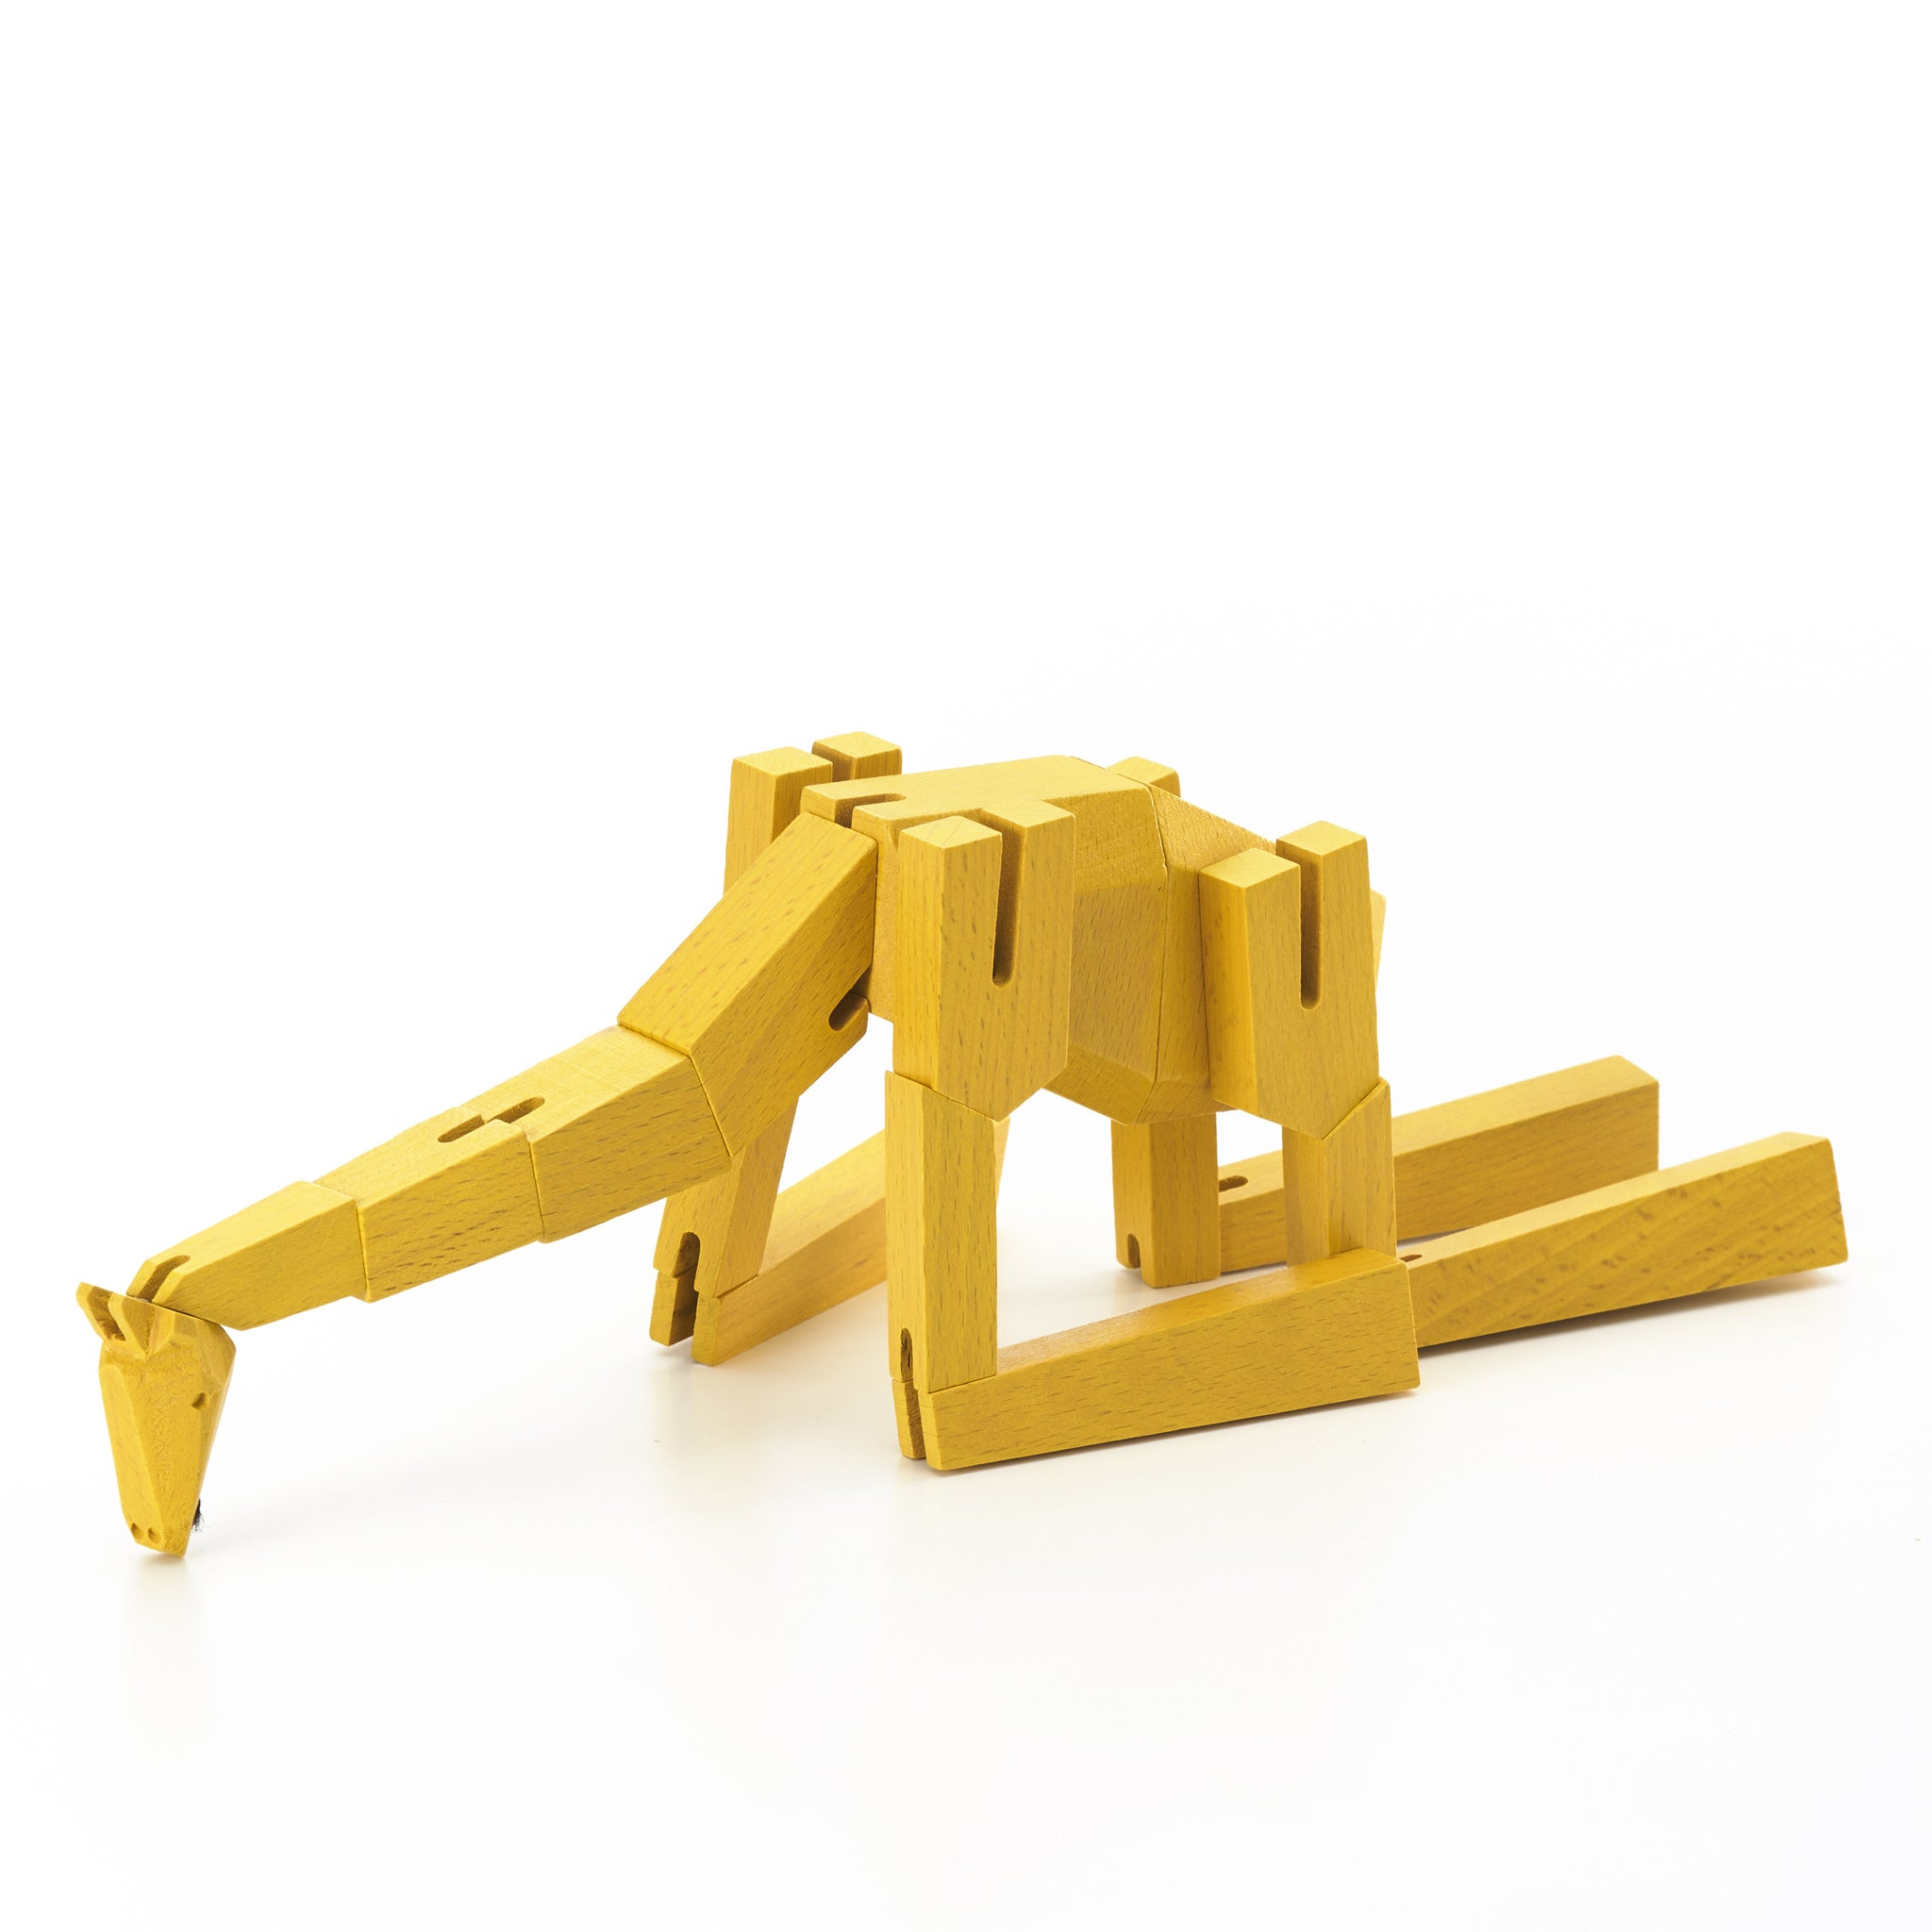 Morphits ® Giraffe Wooden Toy Playset Puzzle Yellow Sit Neck Down